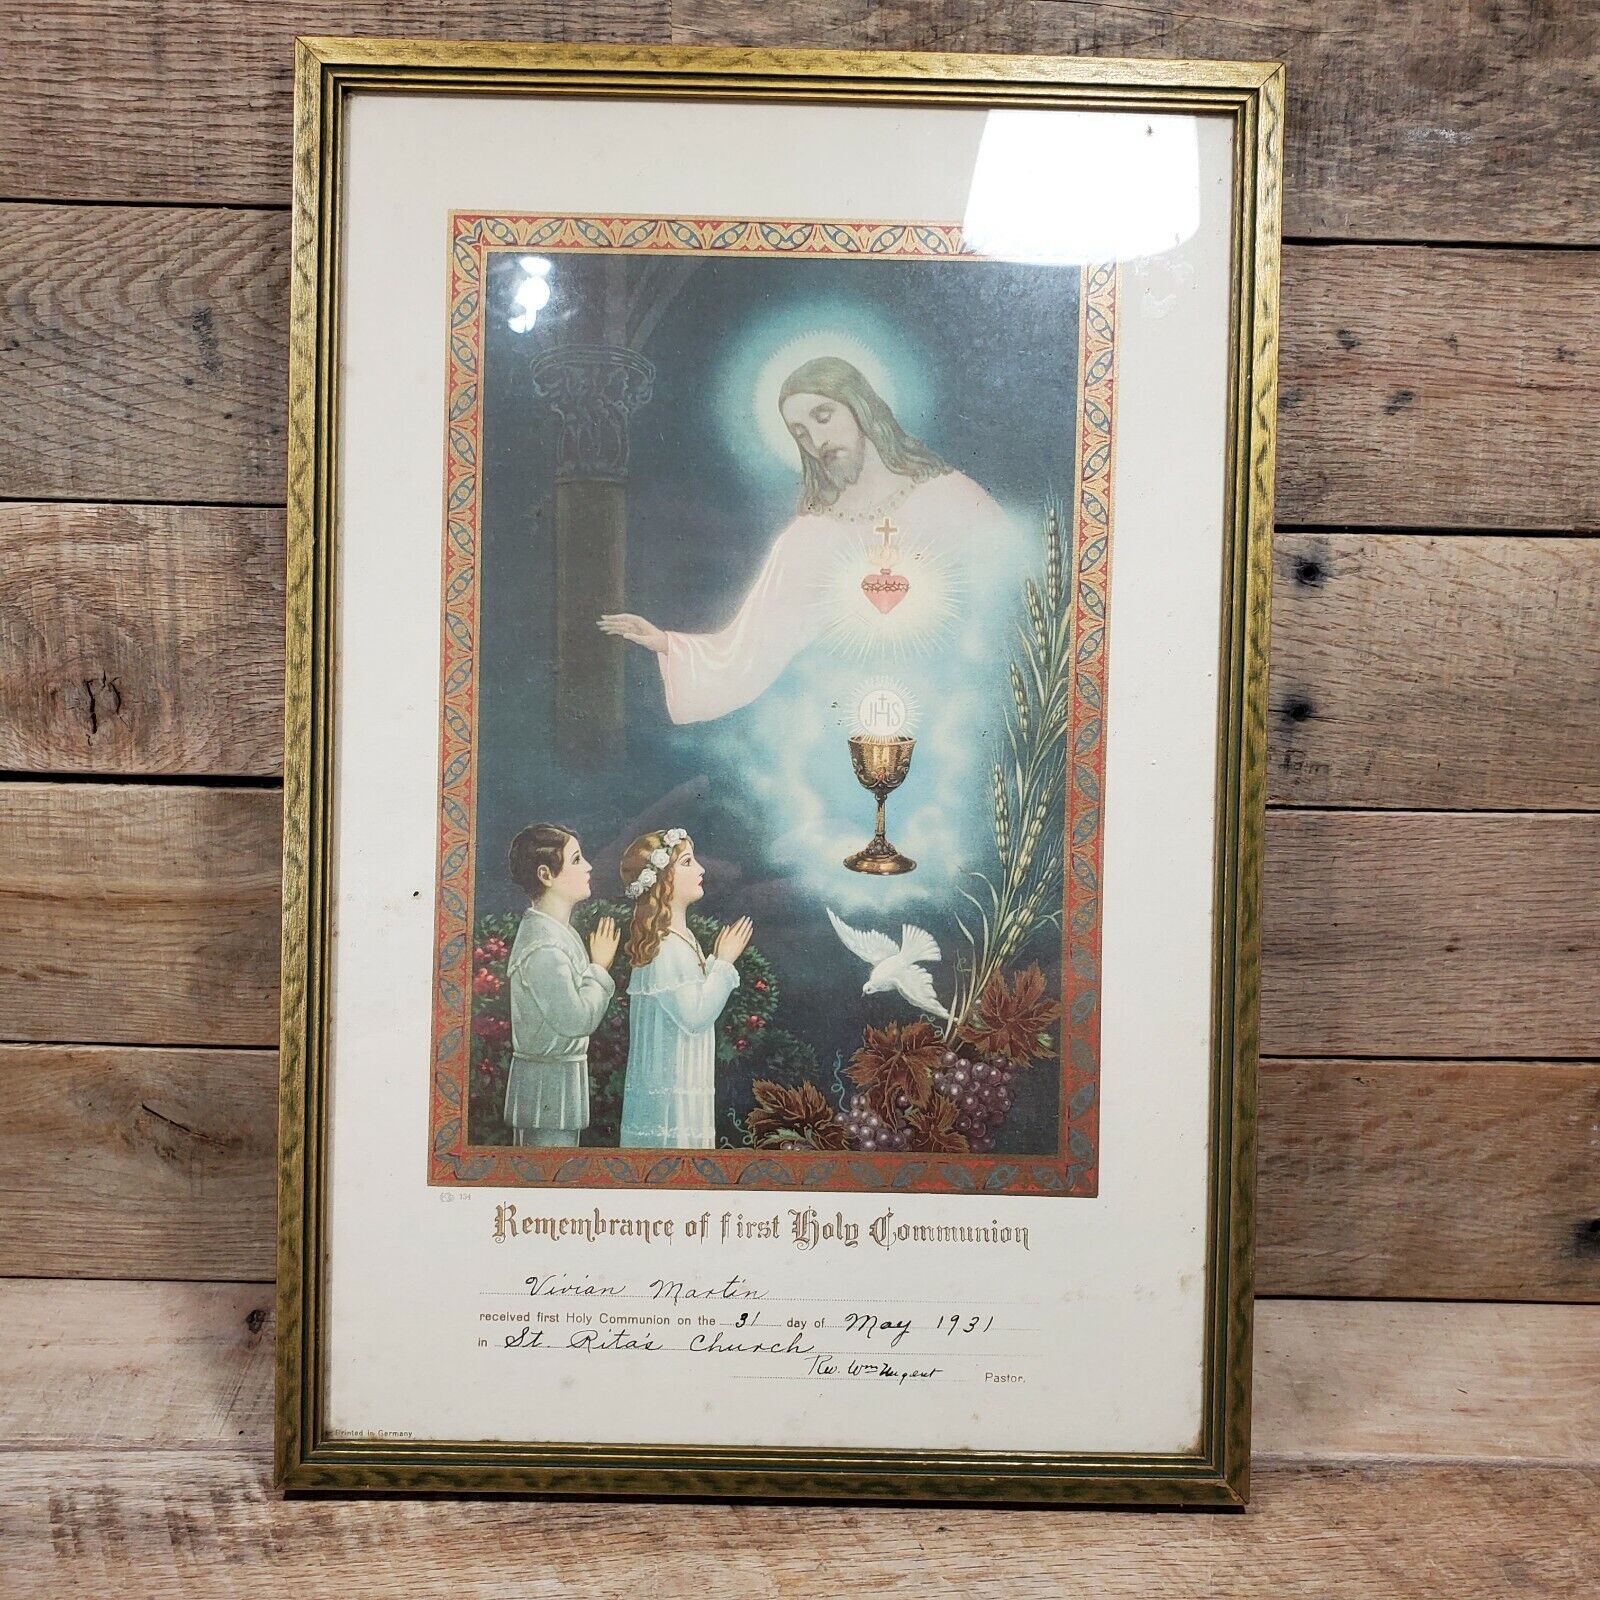 VTG Remembrance of First Holy Communion Framed Certificate 1931 St Ritas Church 